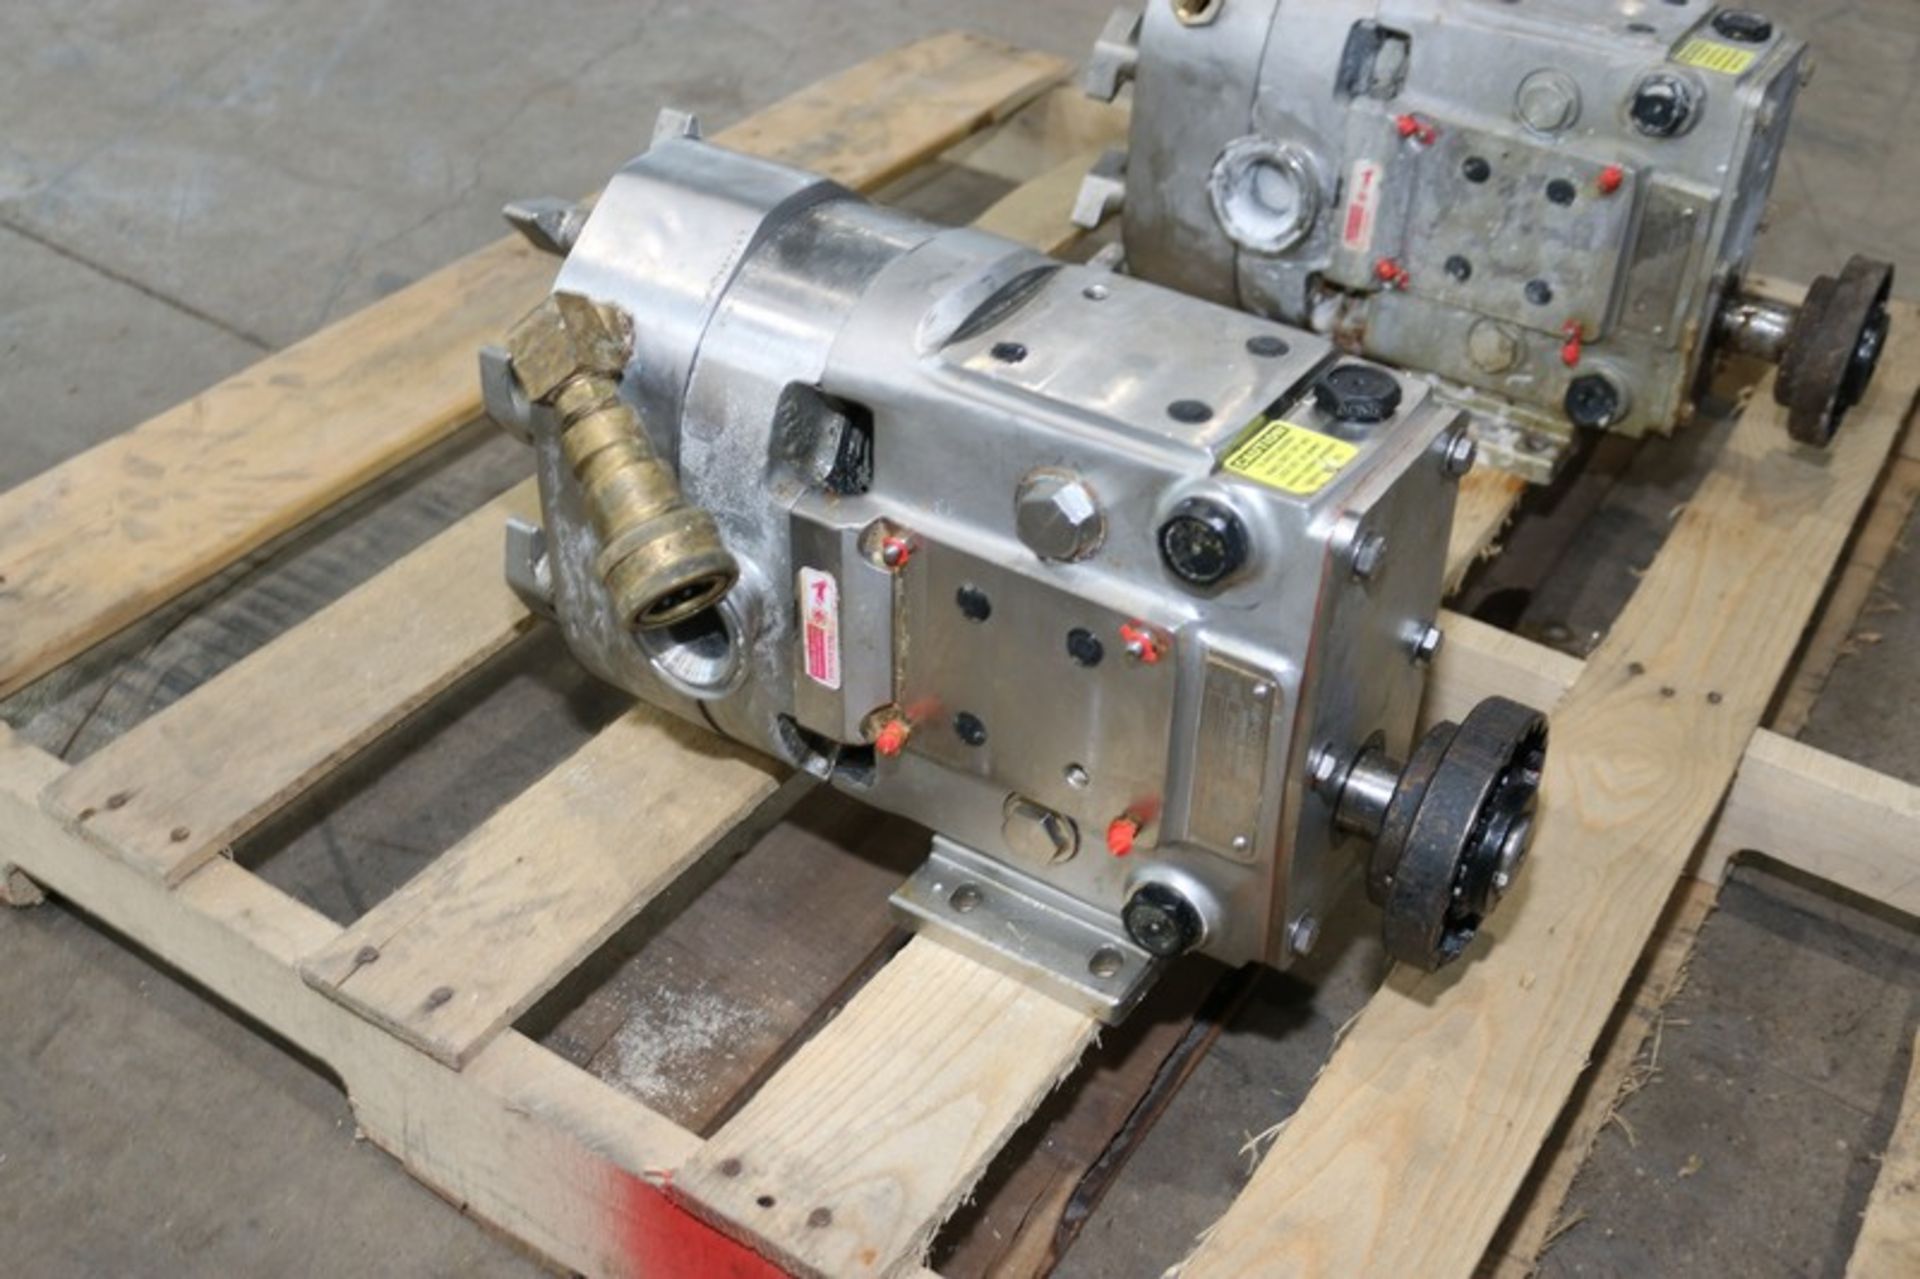 Ampco S/S Positive Displacement Pump Head, M/N ZP1+030-SO, S/N 1934541-5-1, with Aprox. 2" Clamp - Image 3 of 5